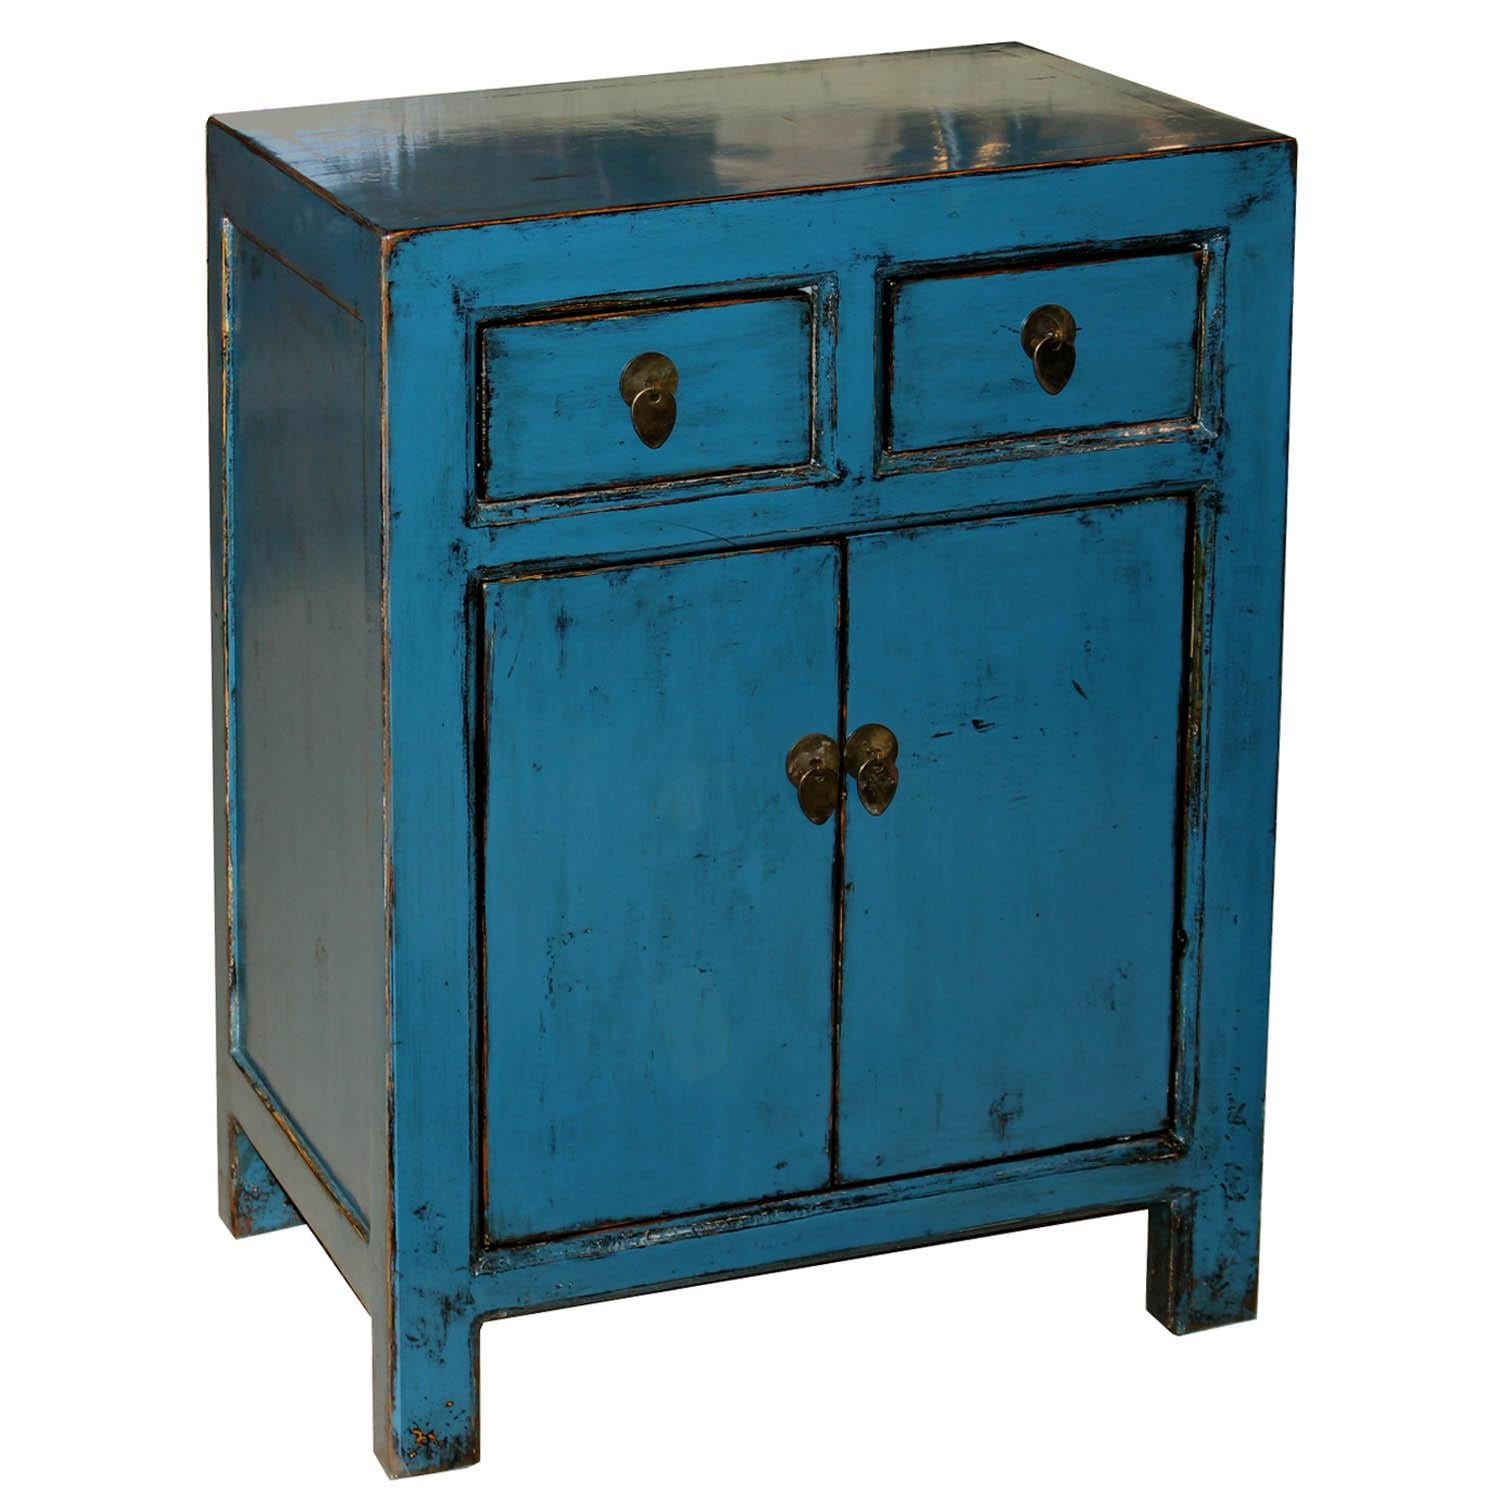 Contemporary blue lacquer side chest with clean lines and exposed wood edges provides a bedroom with a pop of color when placed on either side of a bed with a lamp and books on top. Priced individually not as a pair.